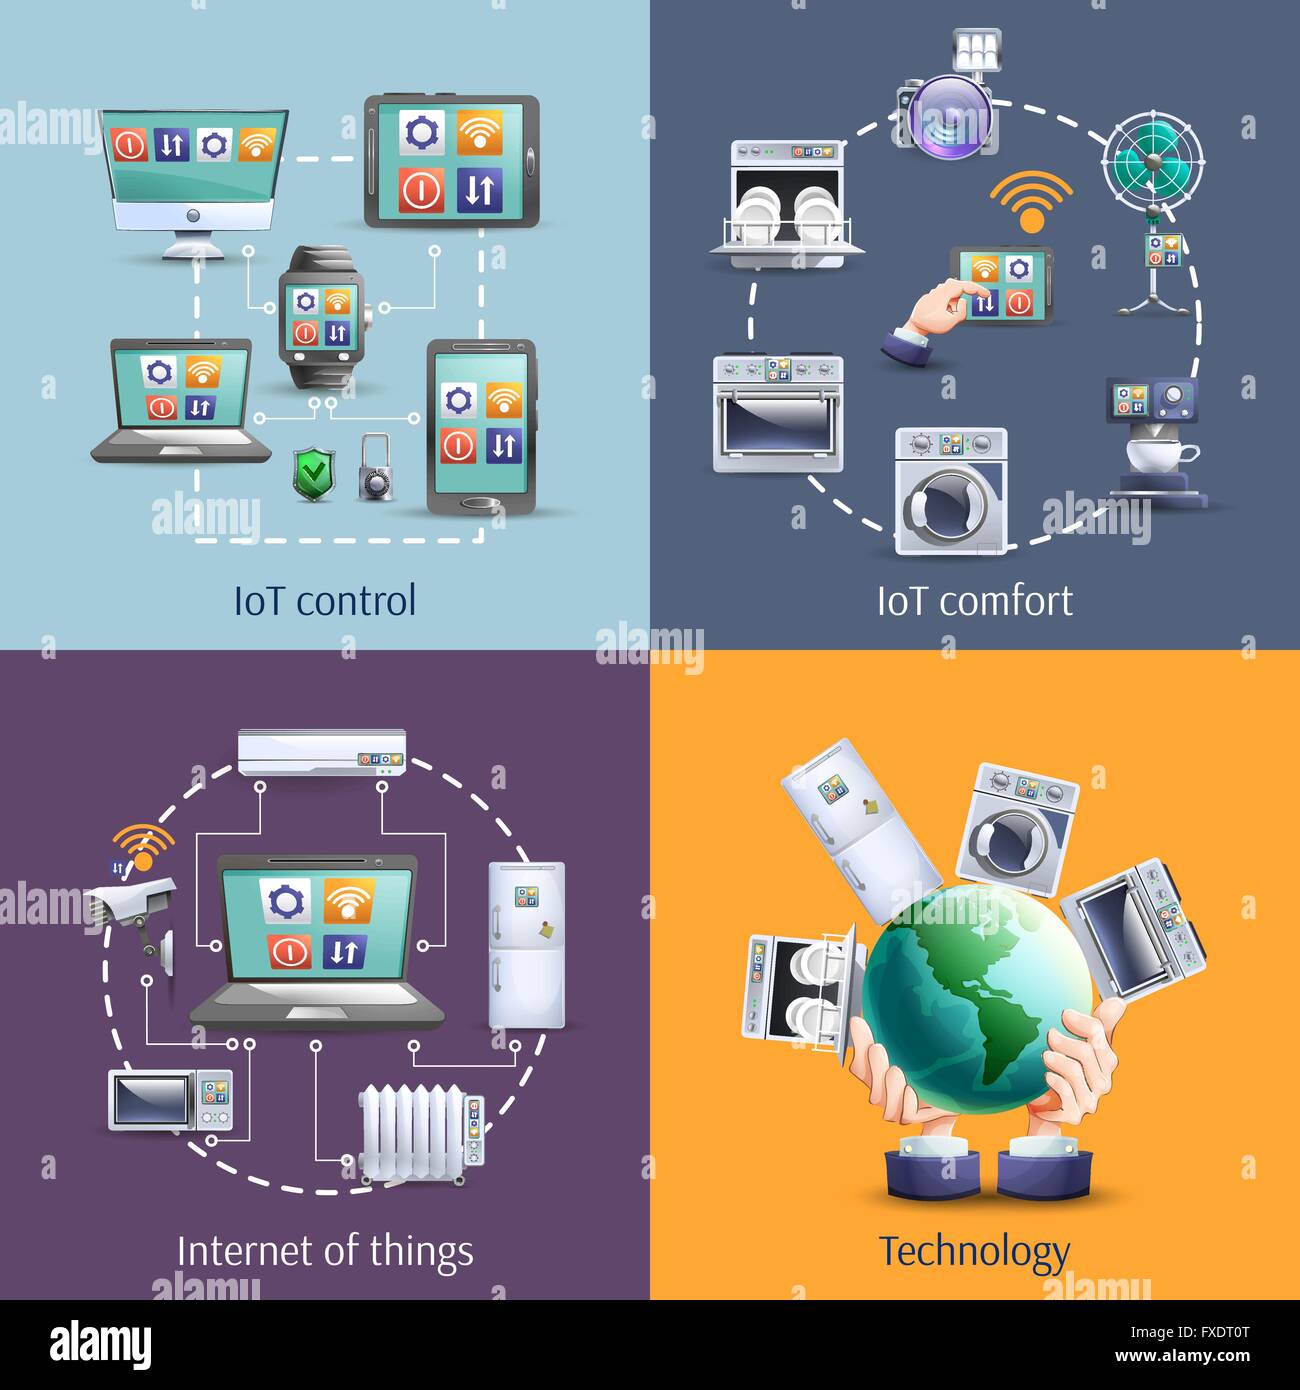 Internet of things 4 flat icons Stock Vector